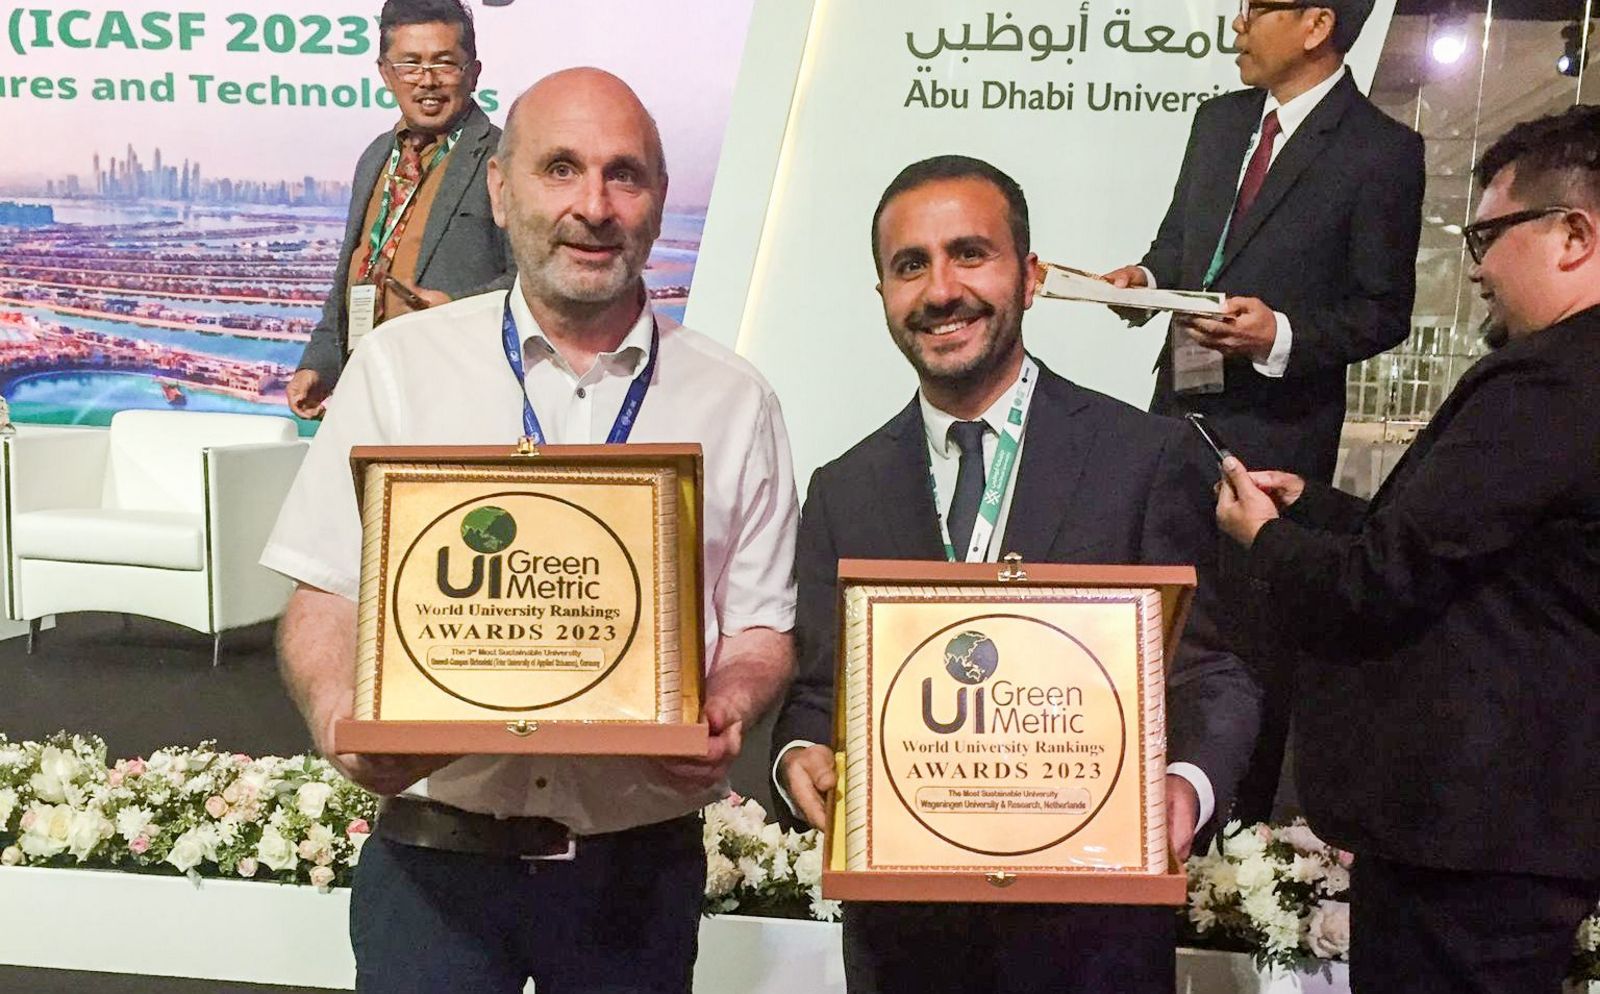 Prof. Dr. Peter Heck (left) with Wassim Beaineh (right), the representative of Wageningen University, which took first place in the ranking, at the GreenMetric Award 2023 ceremony at the COP28 World Climate Conference in Dubai